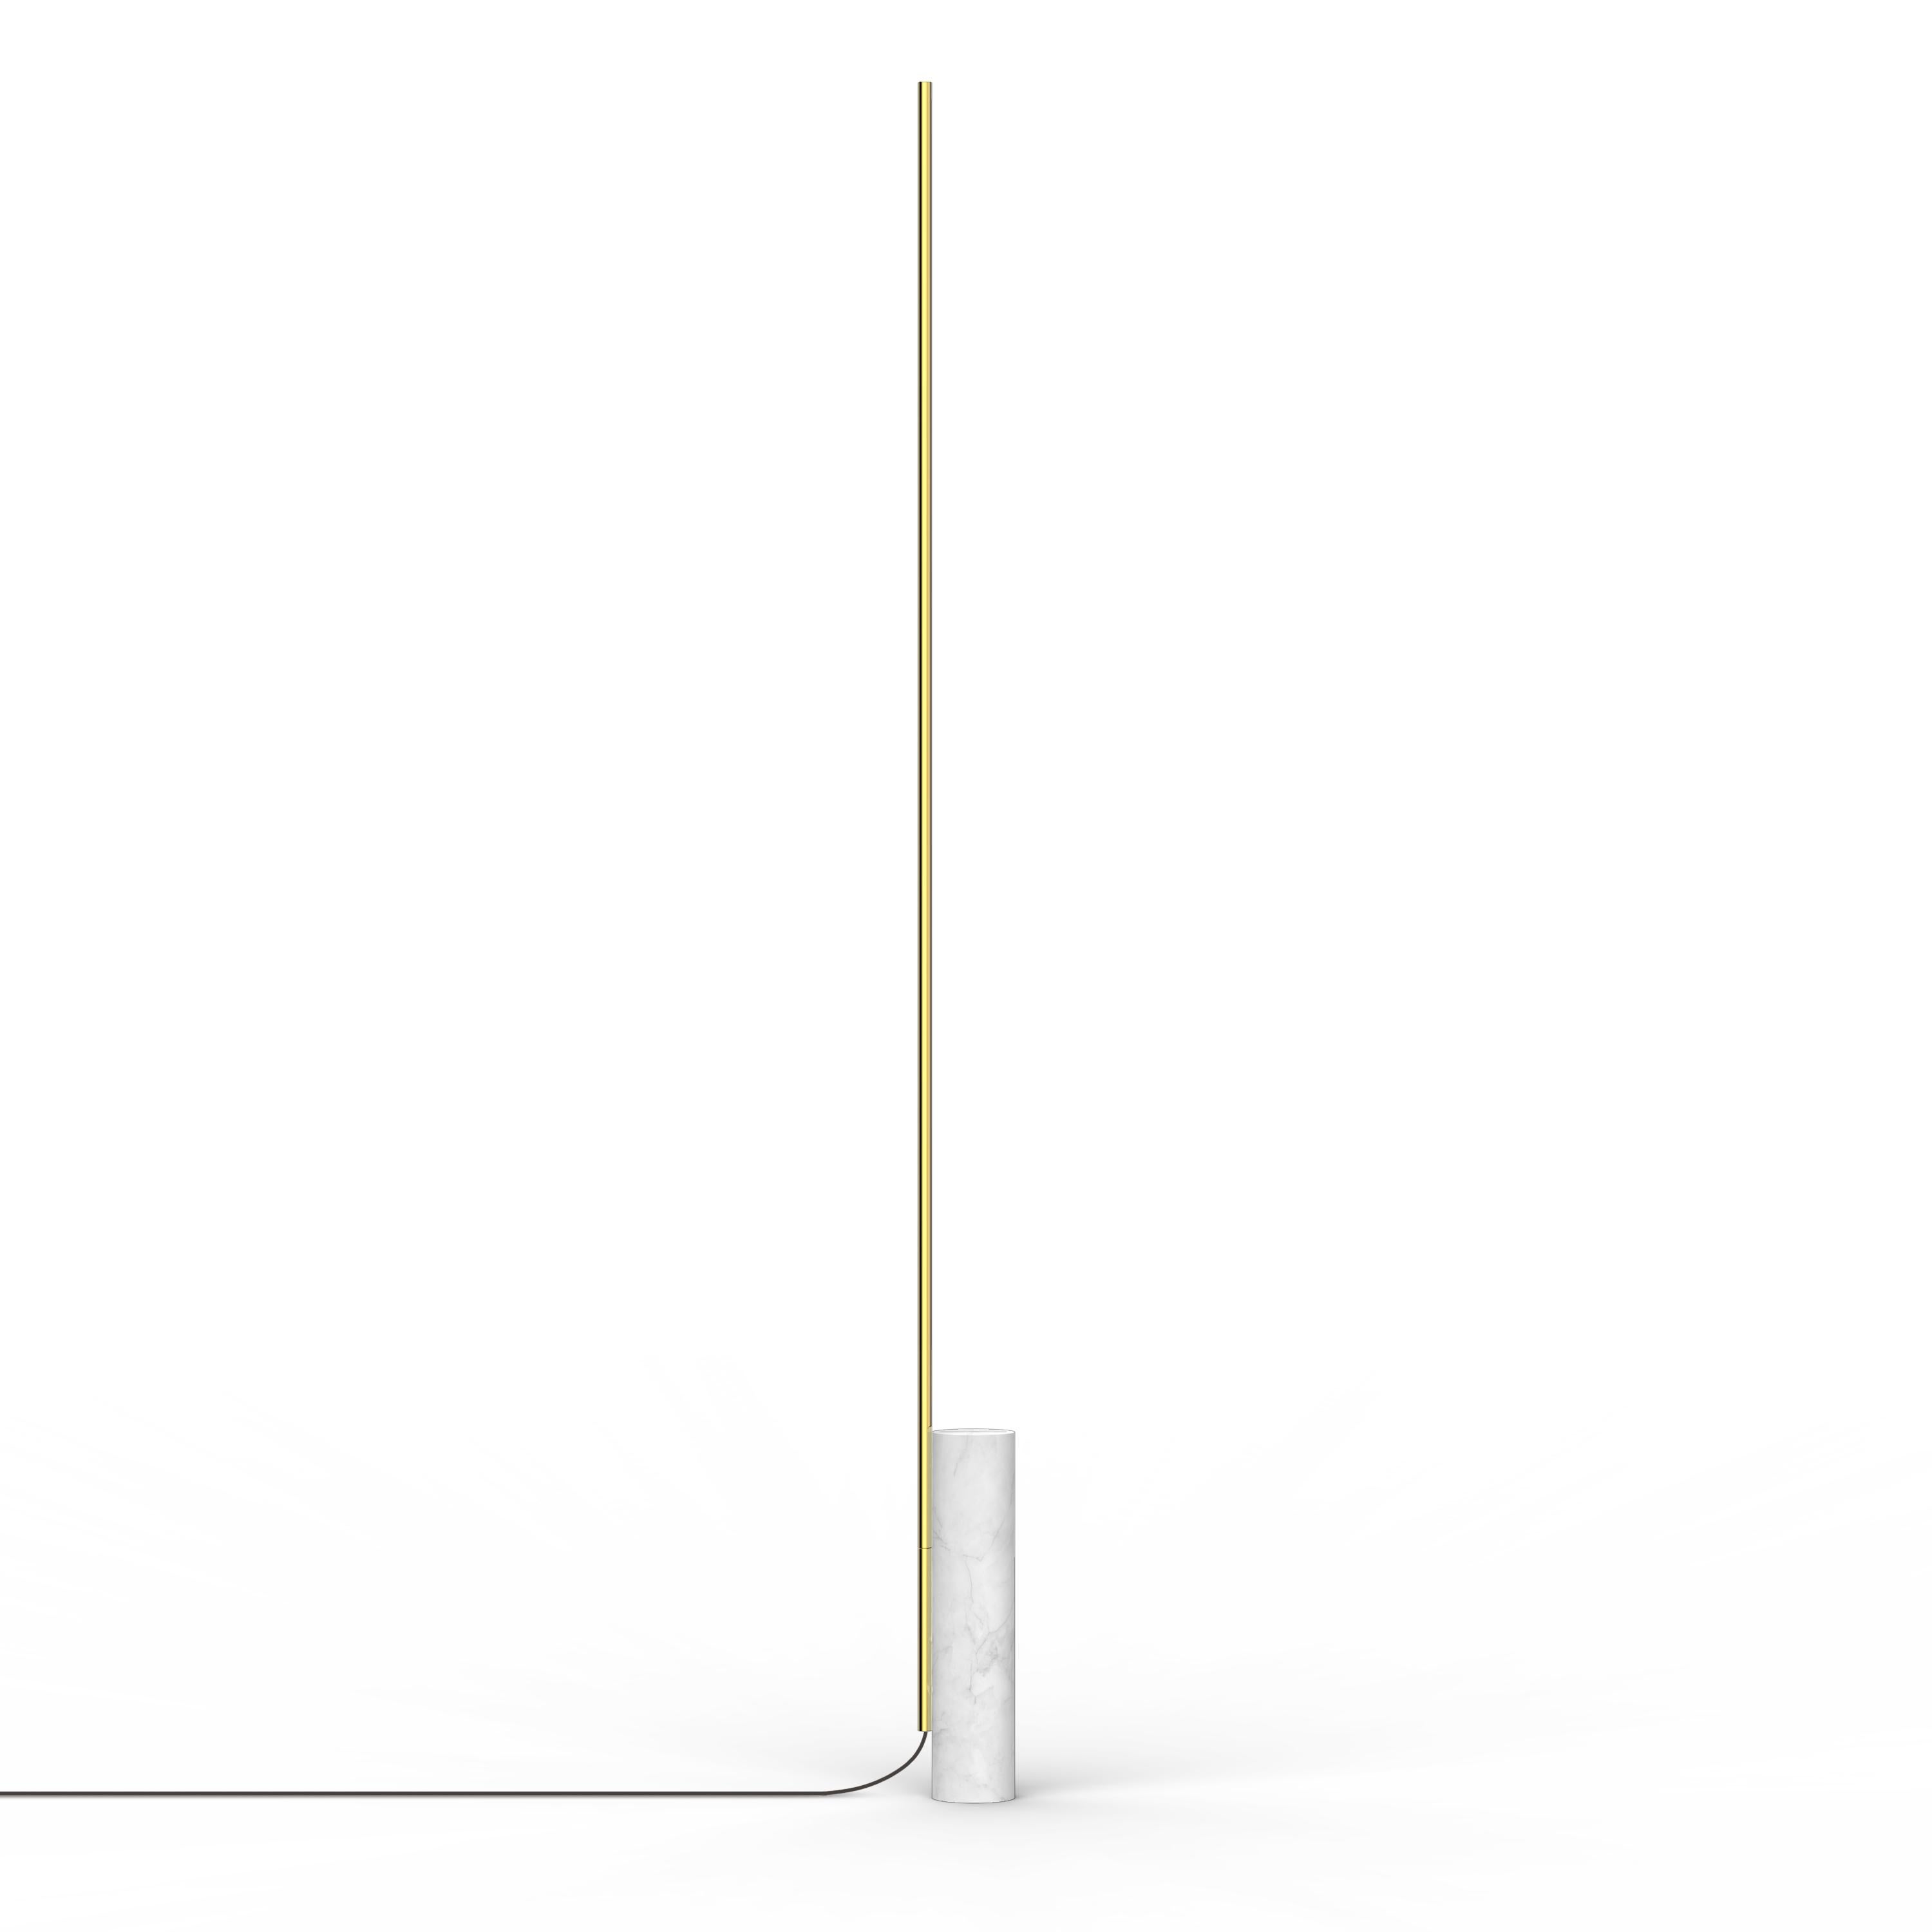 T.O celebrates and reinforces the importance of light as a pillar in our daily life. A monolithic column stands to support a horizontal and vertical line of light to provide precise light control in all directions. T.O embodies a harmonious dialogue